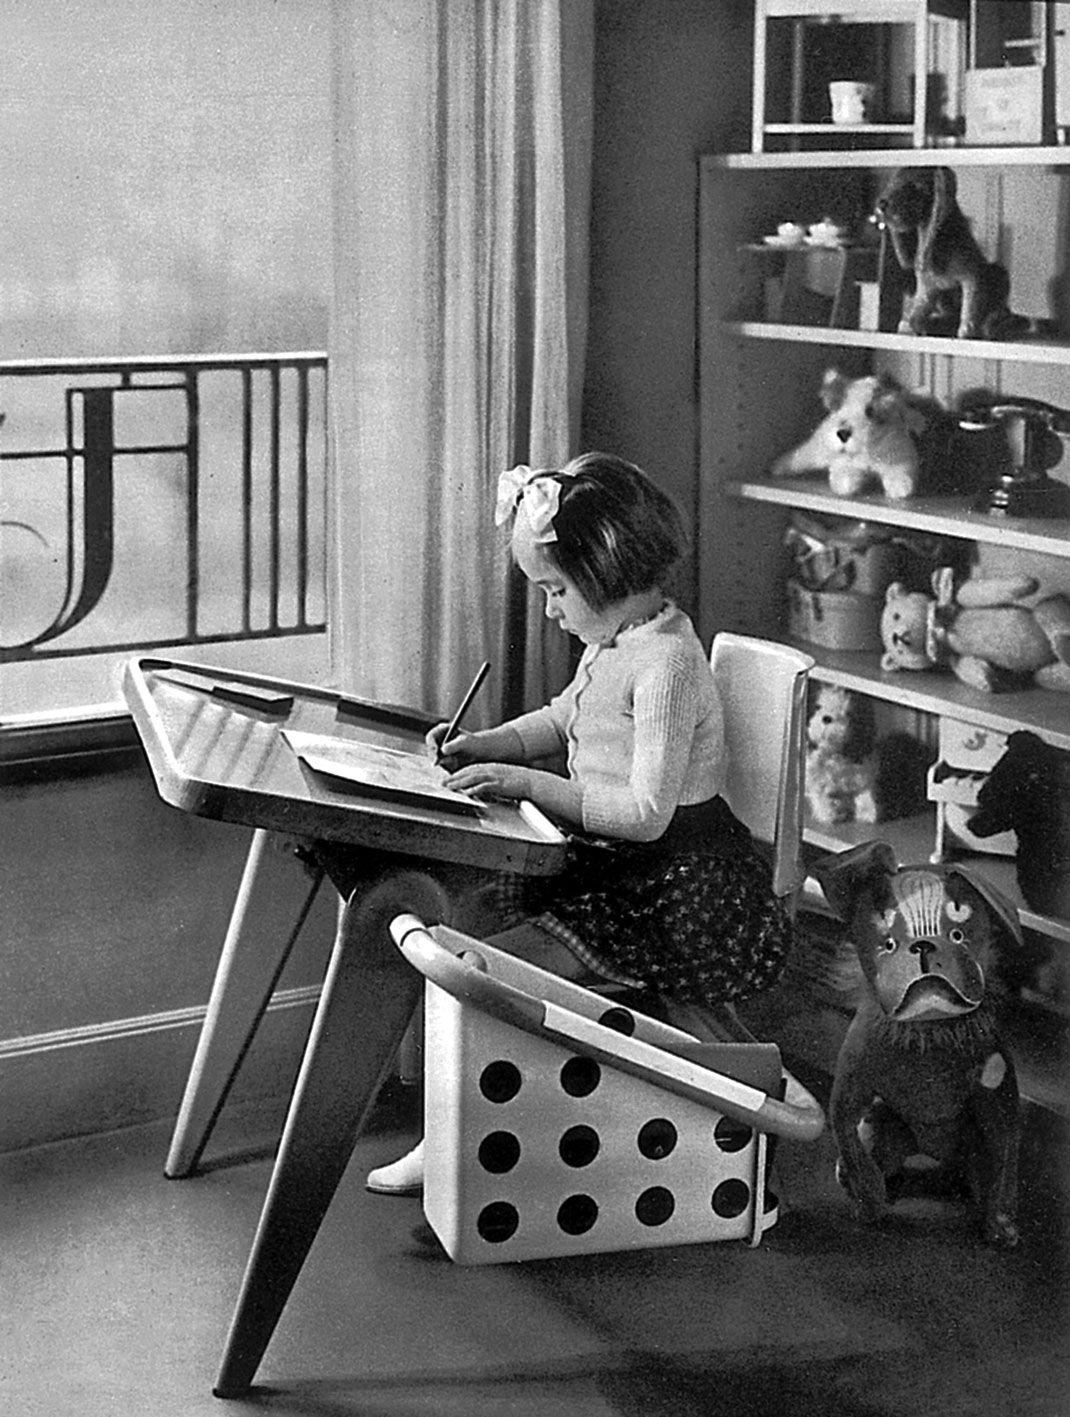 Prototype of single-seater school desk with adjustable desk-top, developed in collaboration with Jacques André for the Salon d’automne, Paris, 1936.